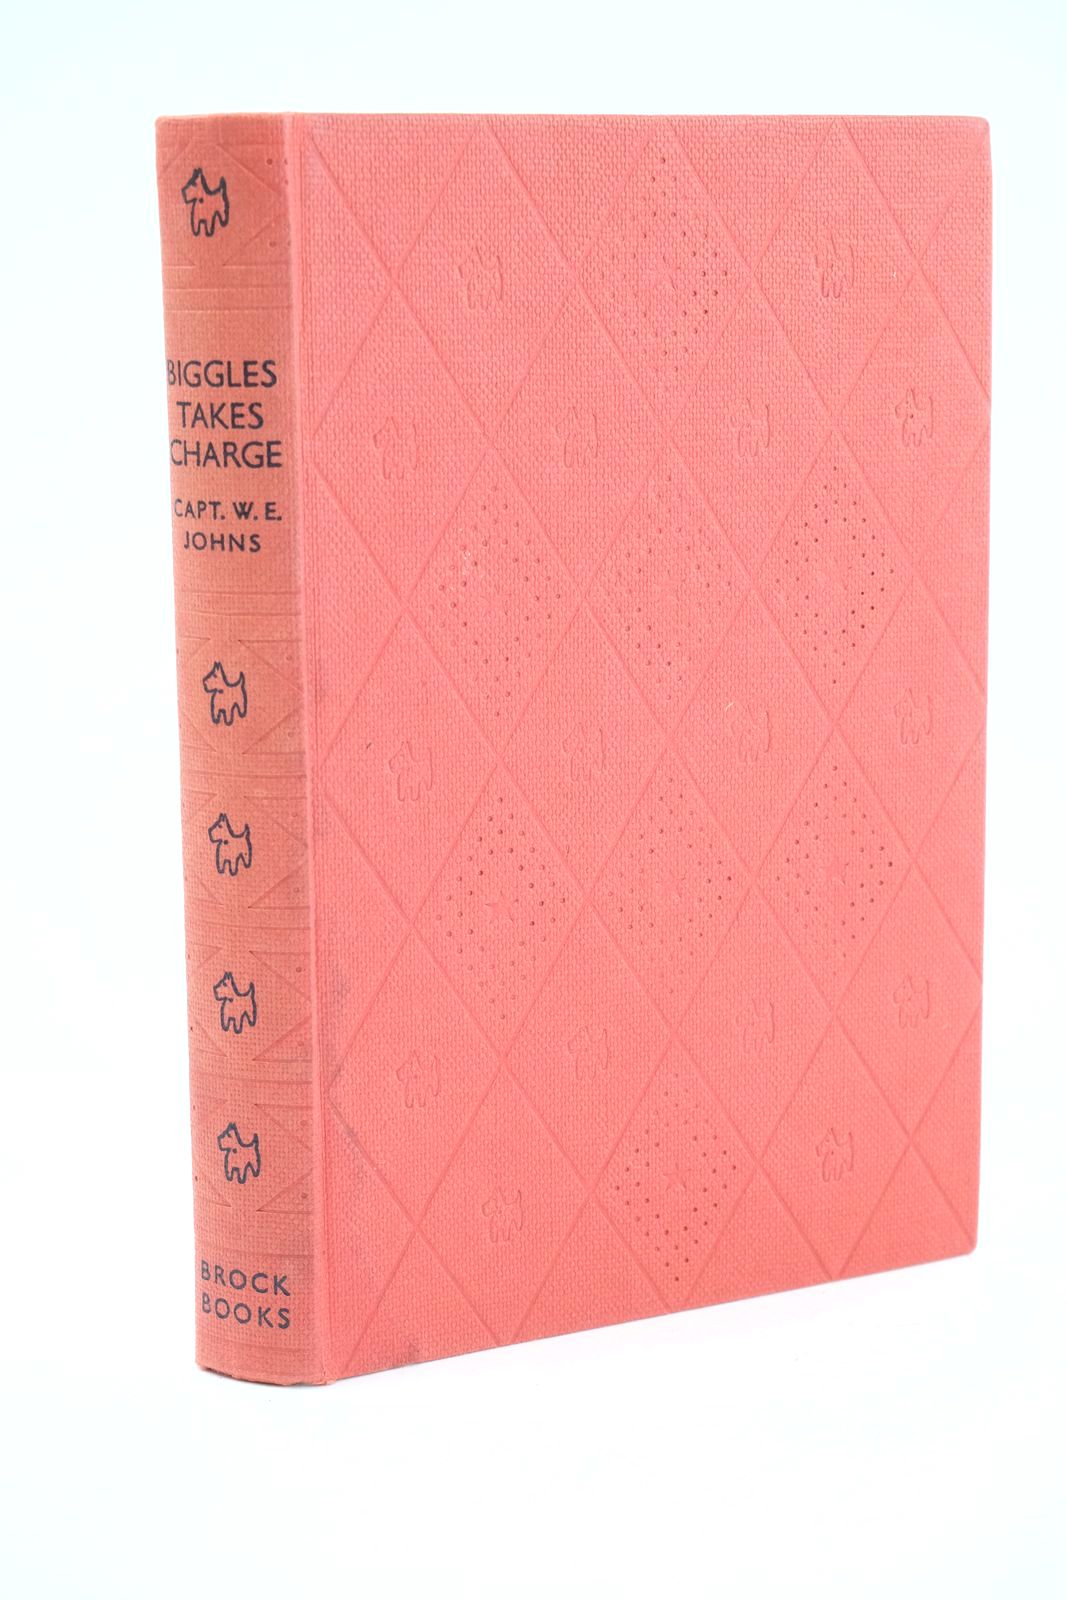 Photo of BIGGLES TAKES CHARGE written by Johns, W.E. illustrated by Stead, Leslie published by Brockhampton Press (STOCK CODE: 1323917)  for sale by Stella & Rose's Books